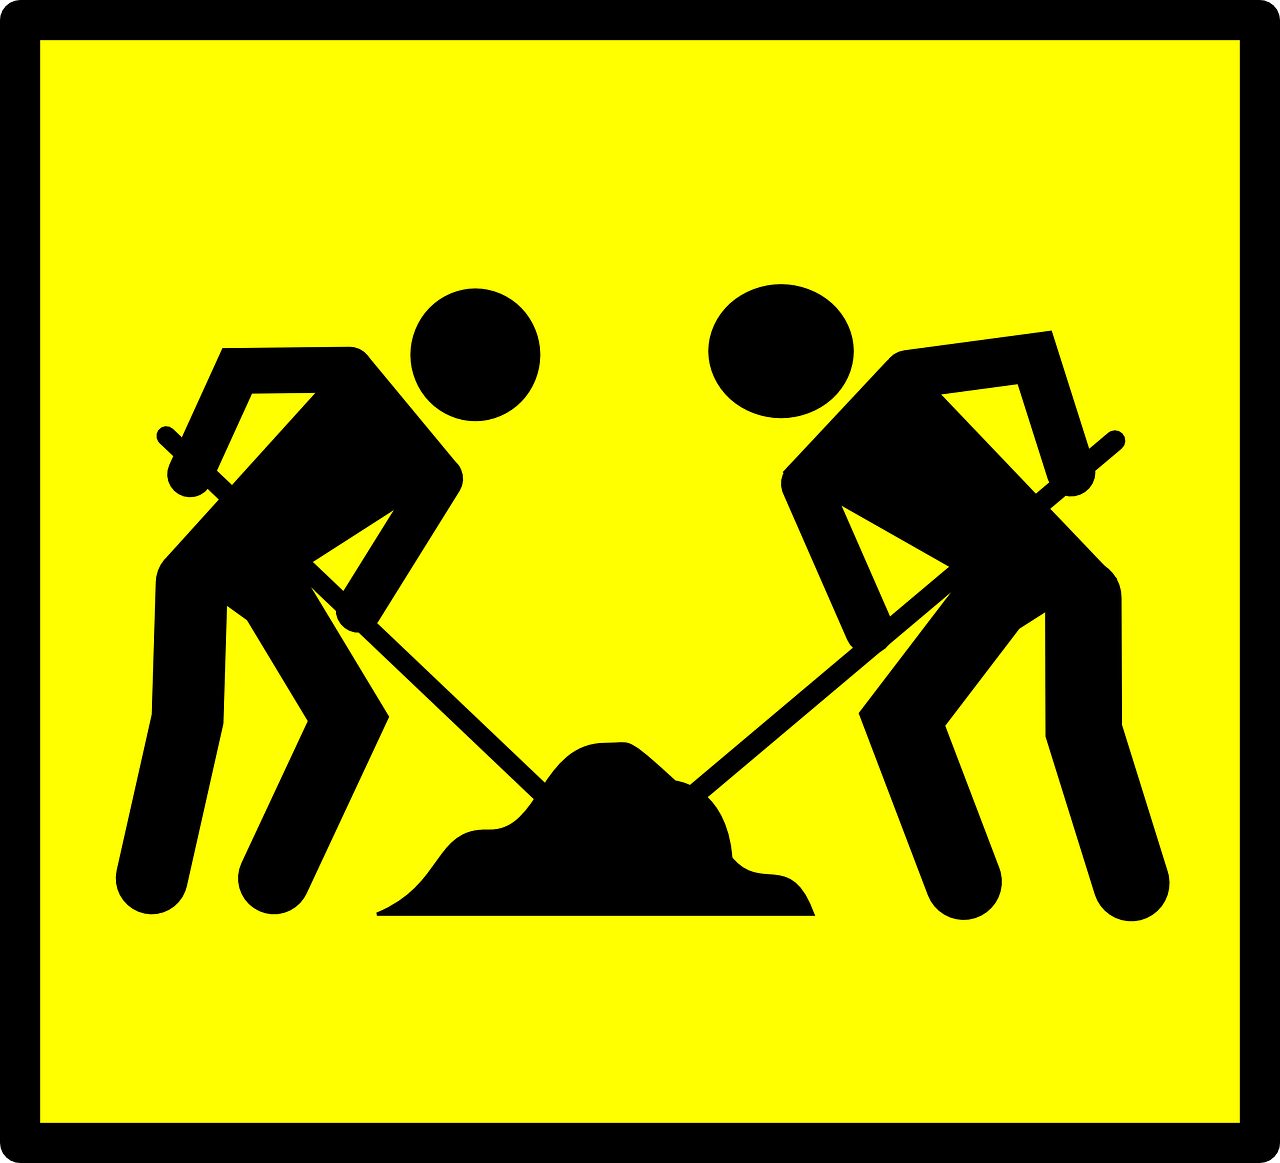 a couple of men standing next to each other with shovels, an illustration of, by Mirko Rački, shutterstock, constructivism, sewer, orthodox icon, black. yellow, working hard